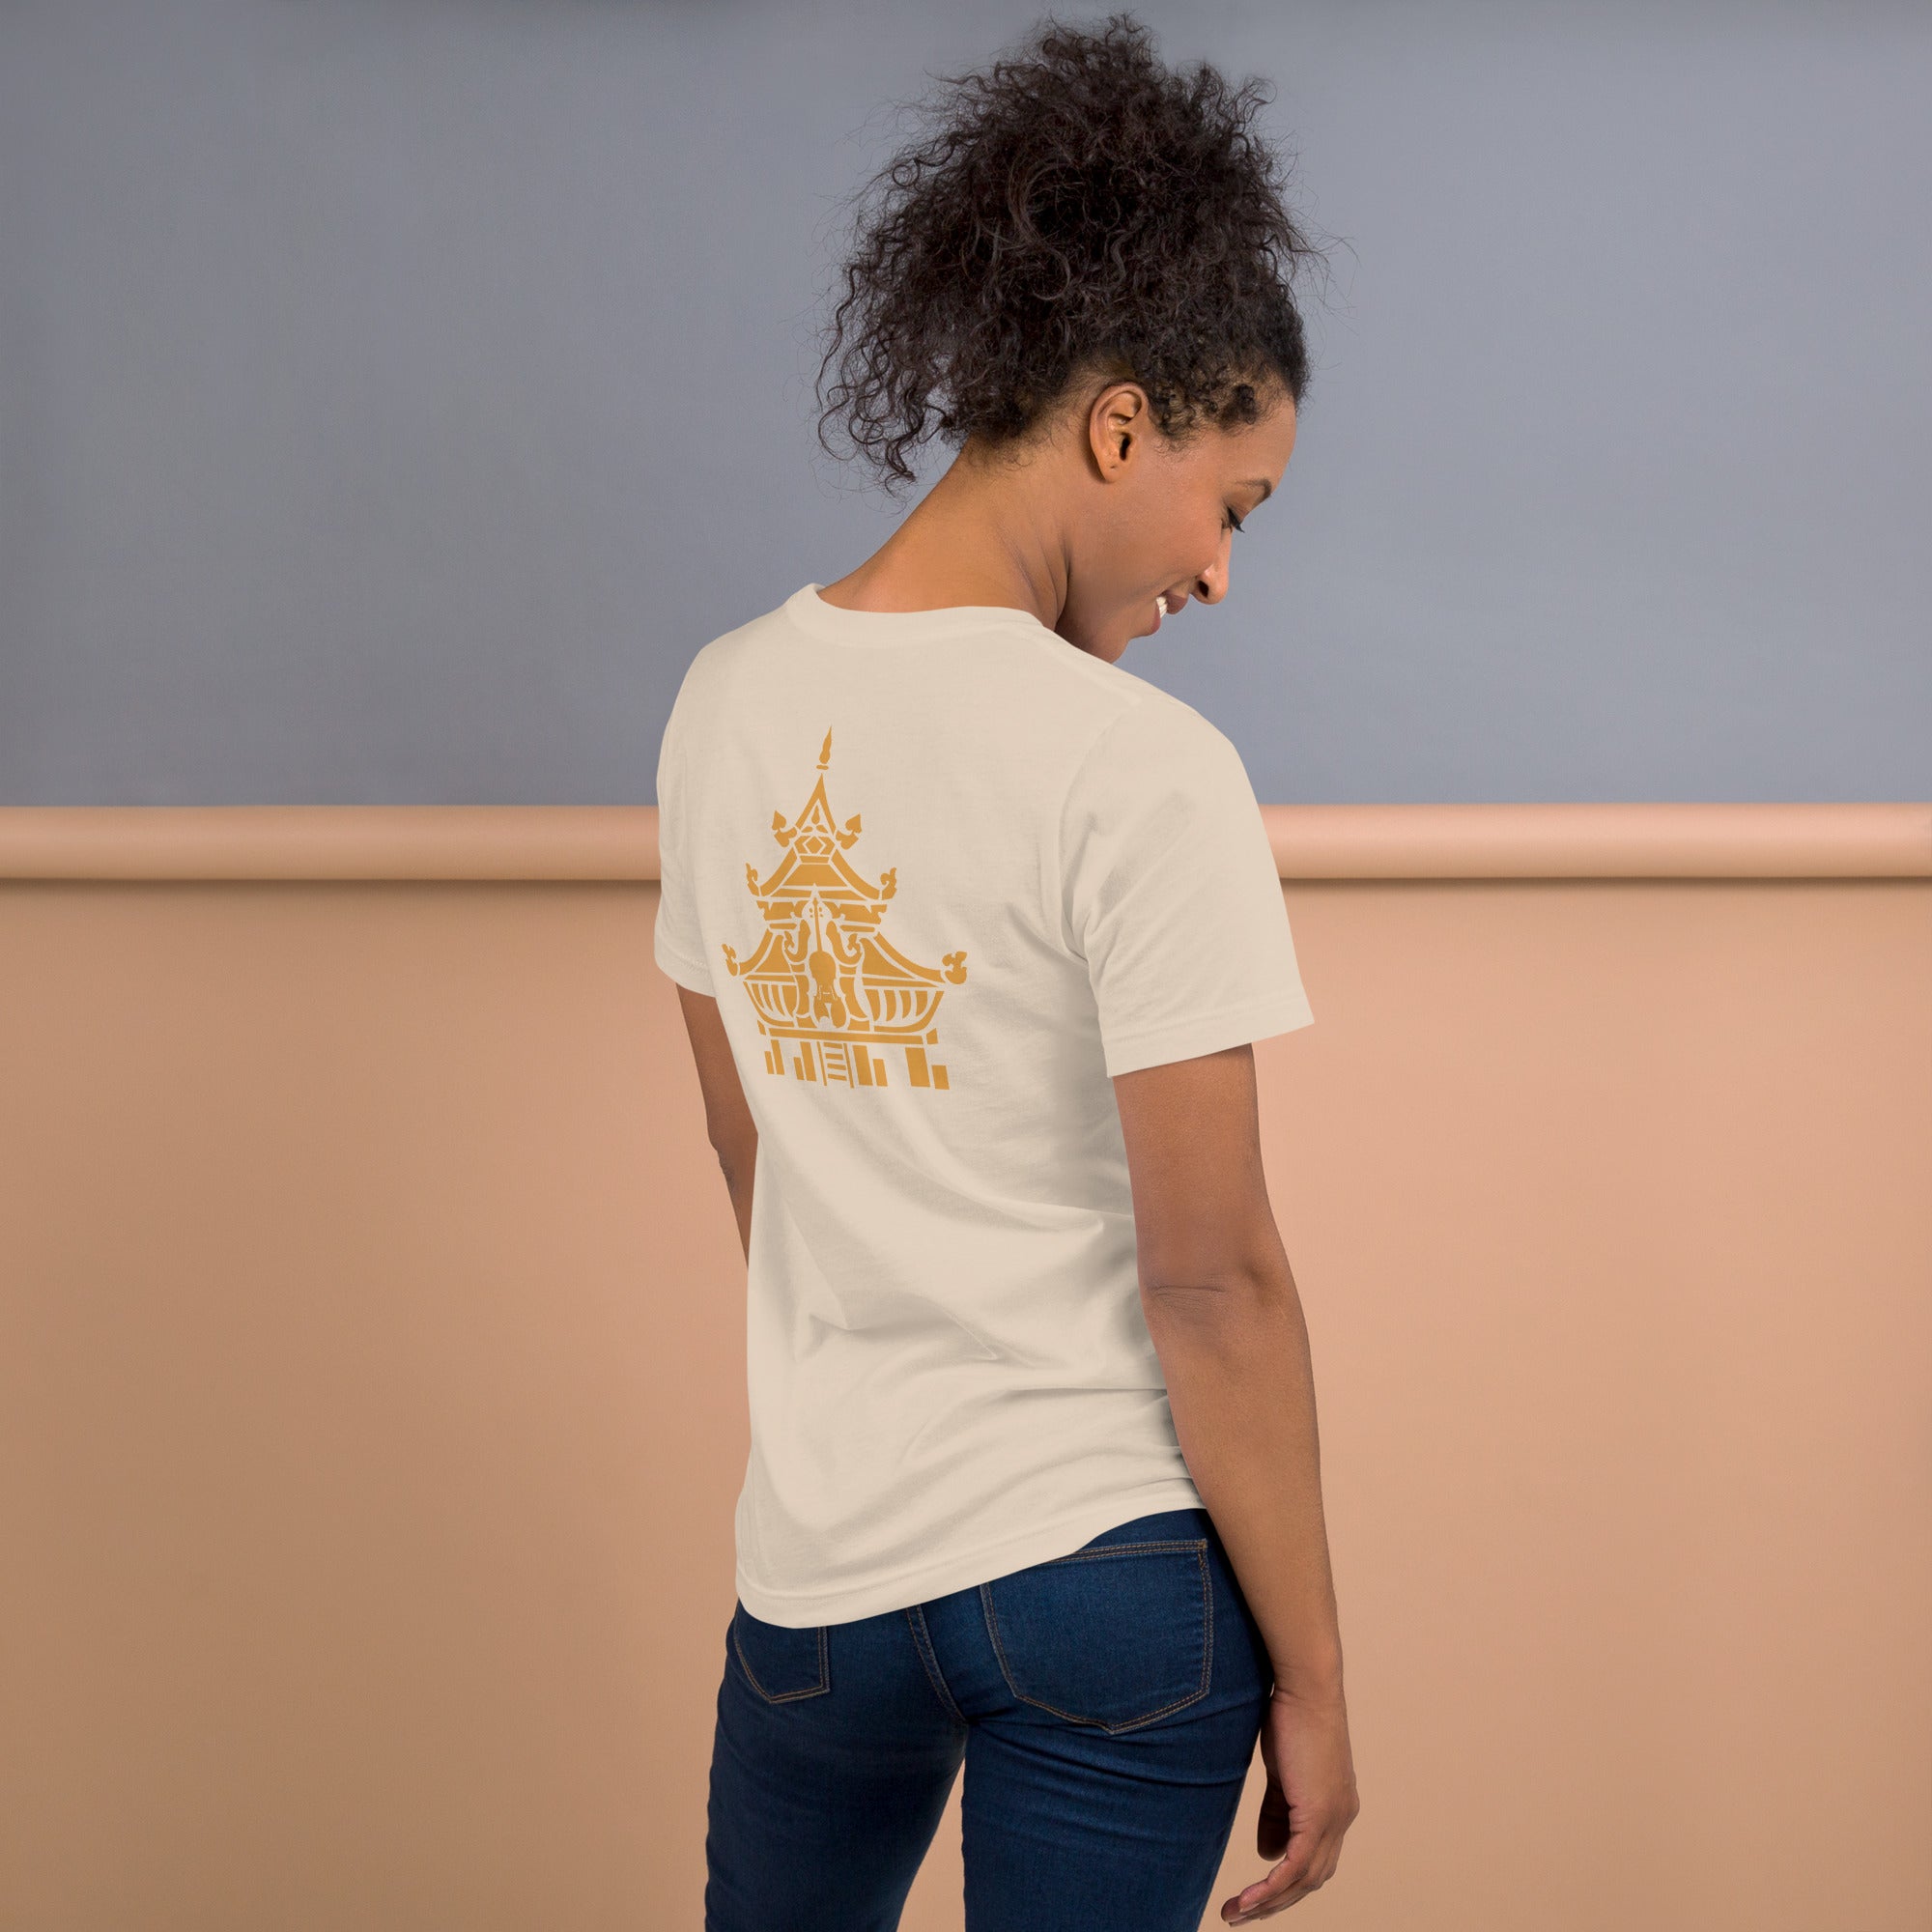 Embroidered and Printed T-Shirt. Common Grounds Jazz Temple